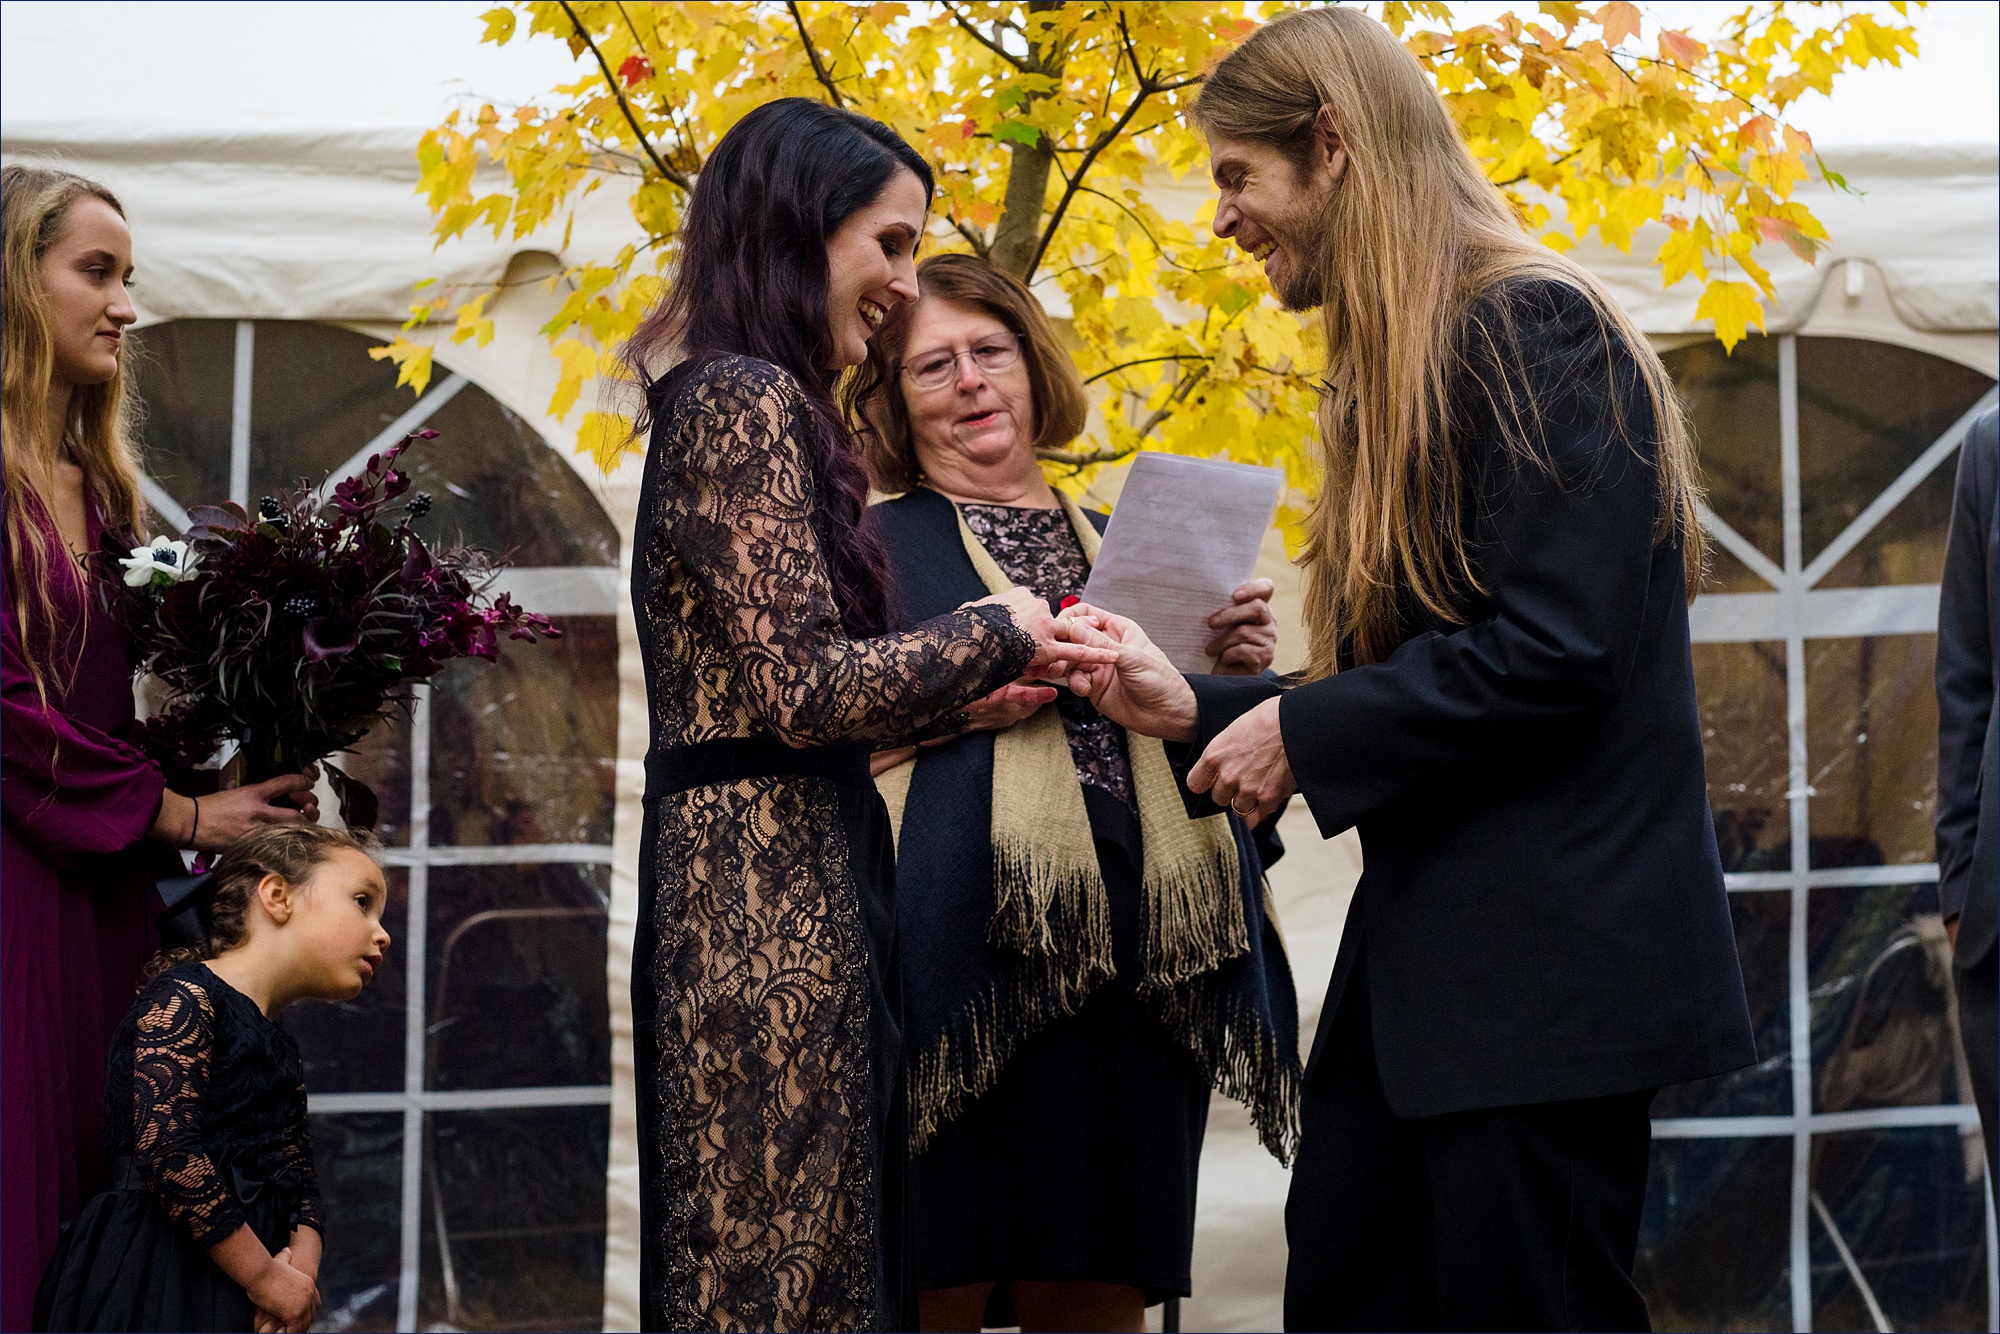 The bride and groom exchange wedding rings at their fall outdoor wedding ceremony